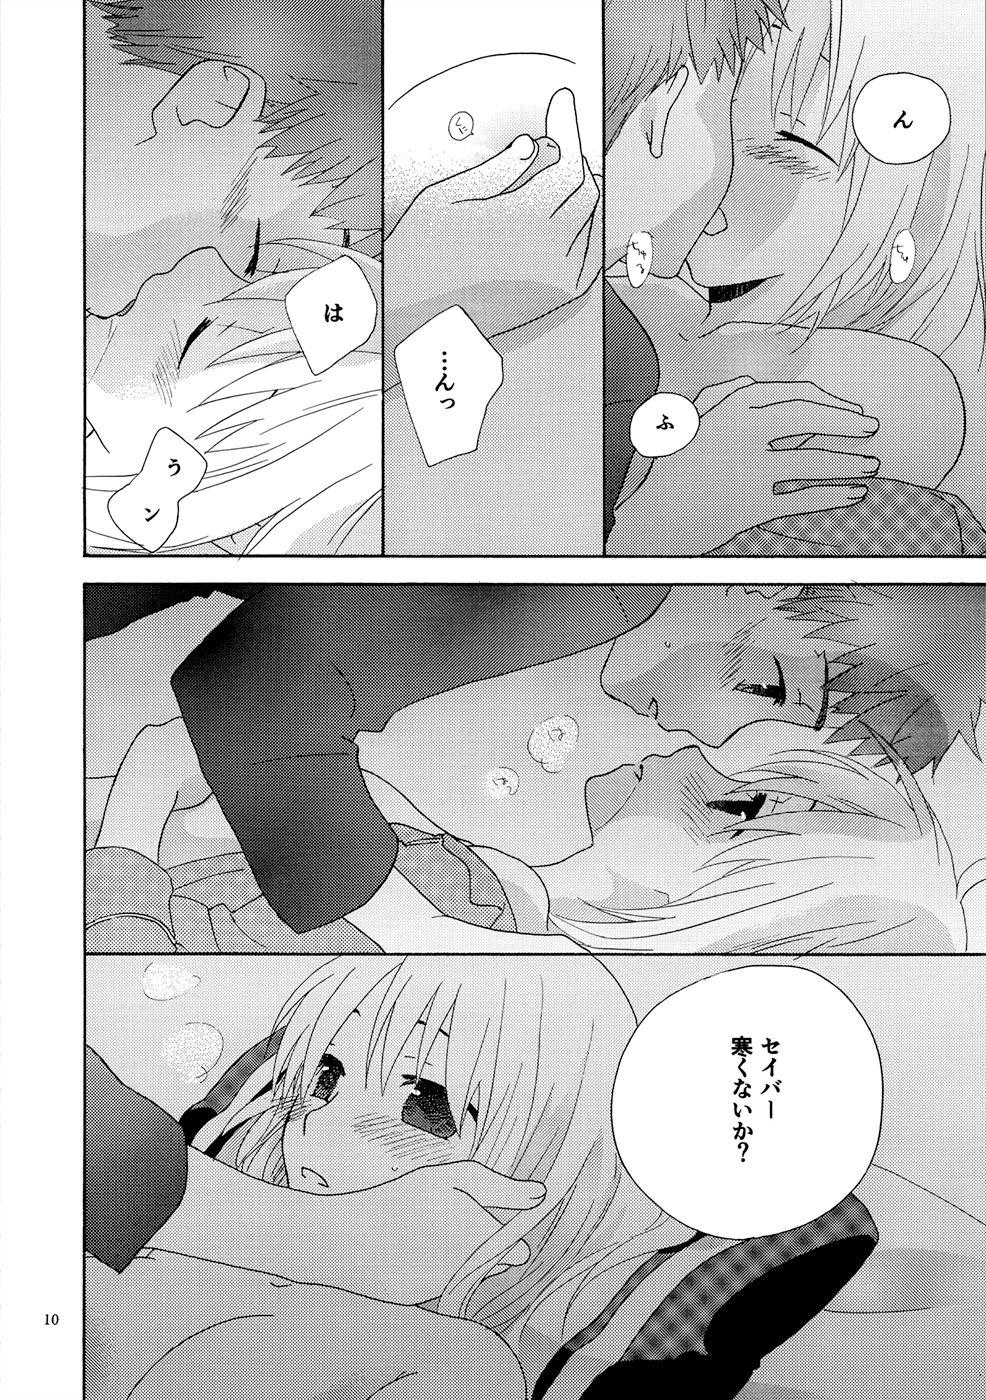 Fingers POP STAR - Fate stay night Realsex - Page 9